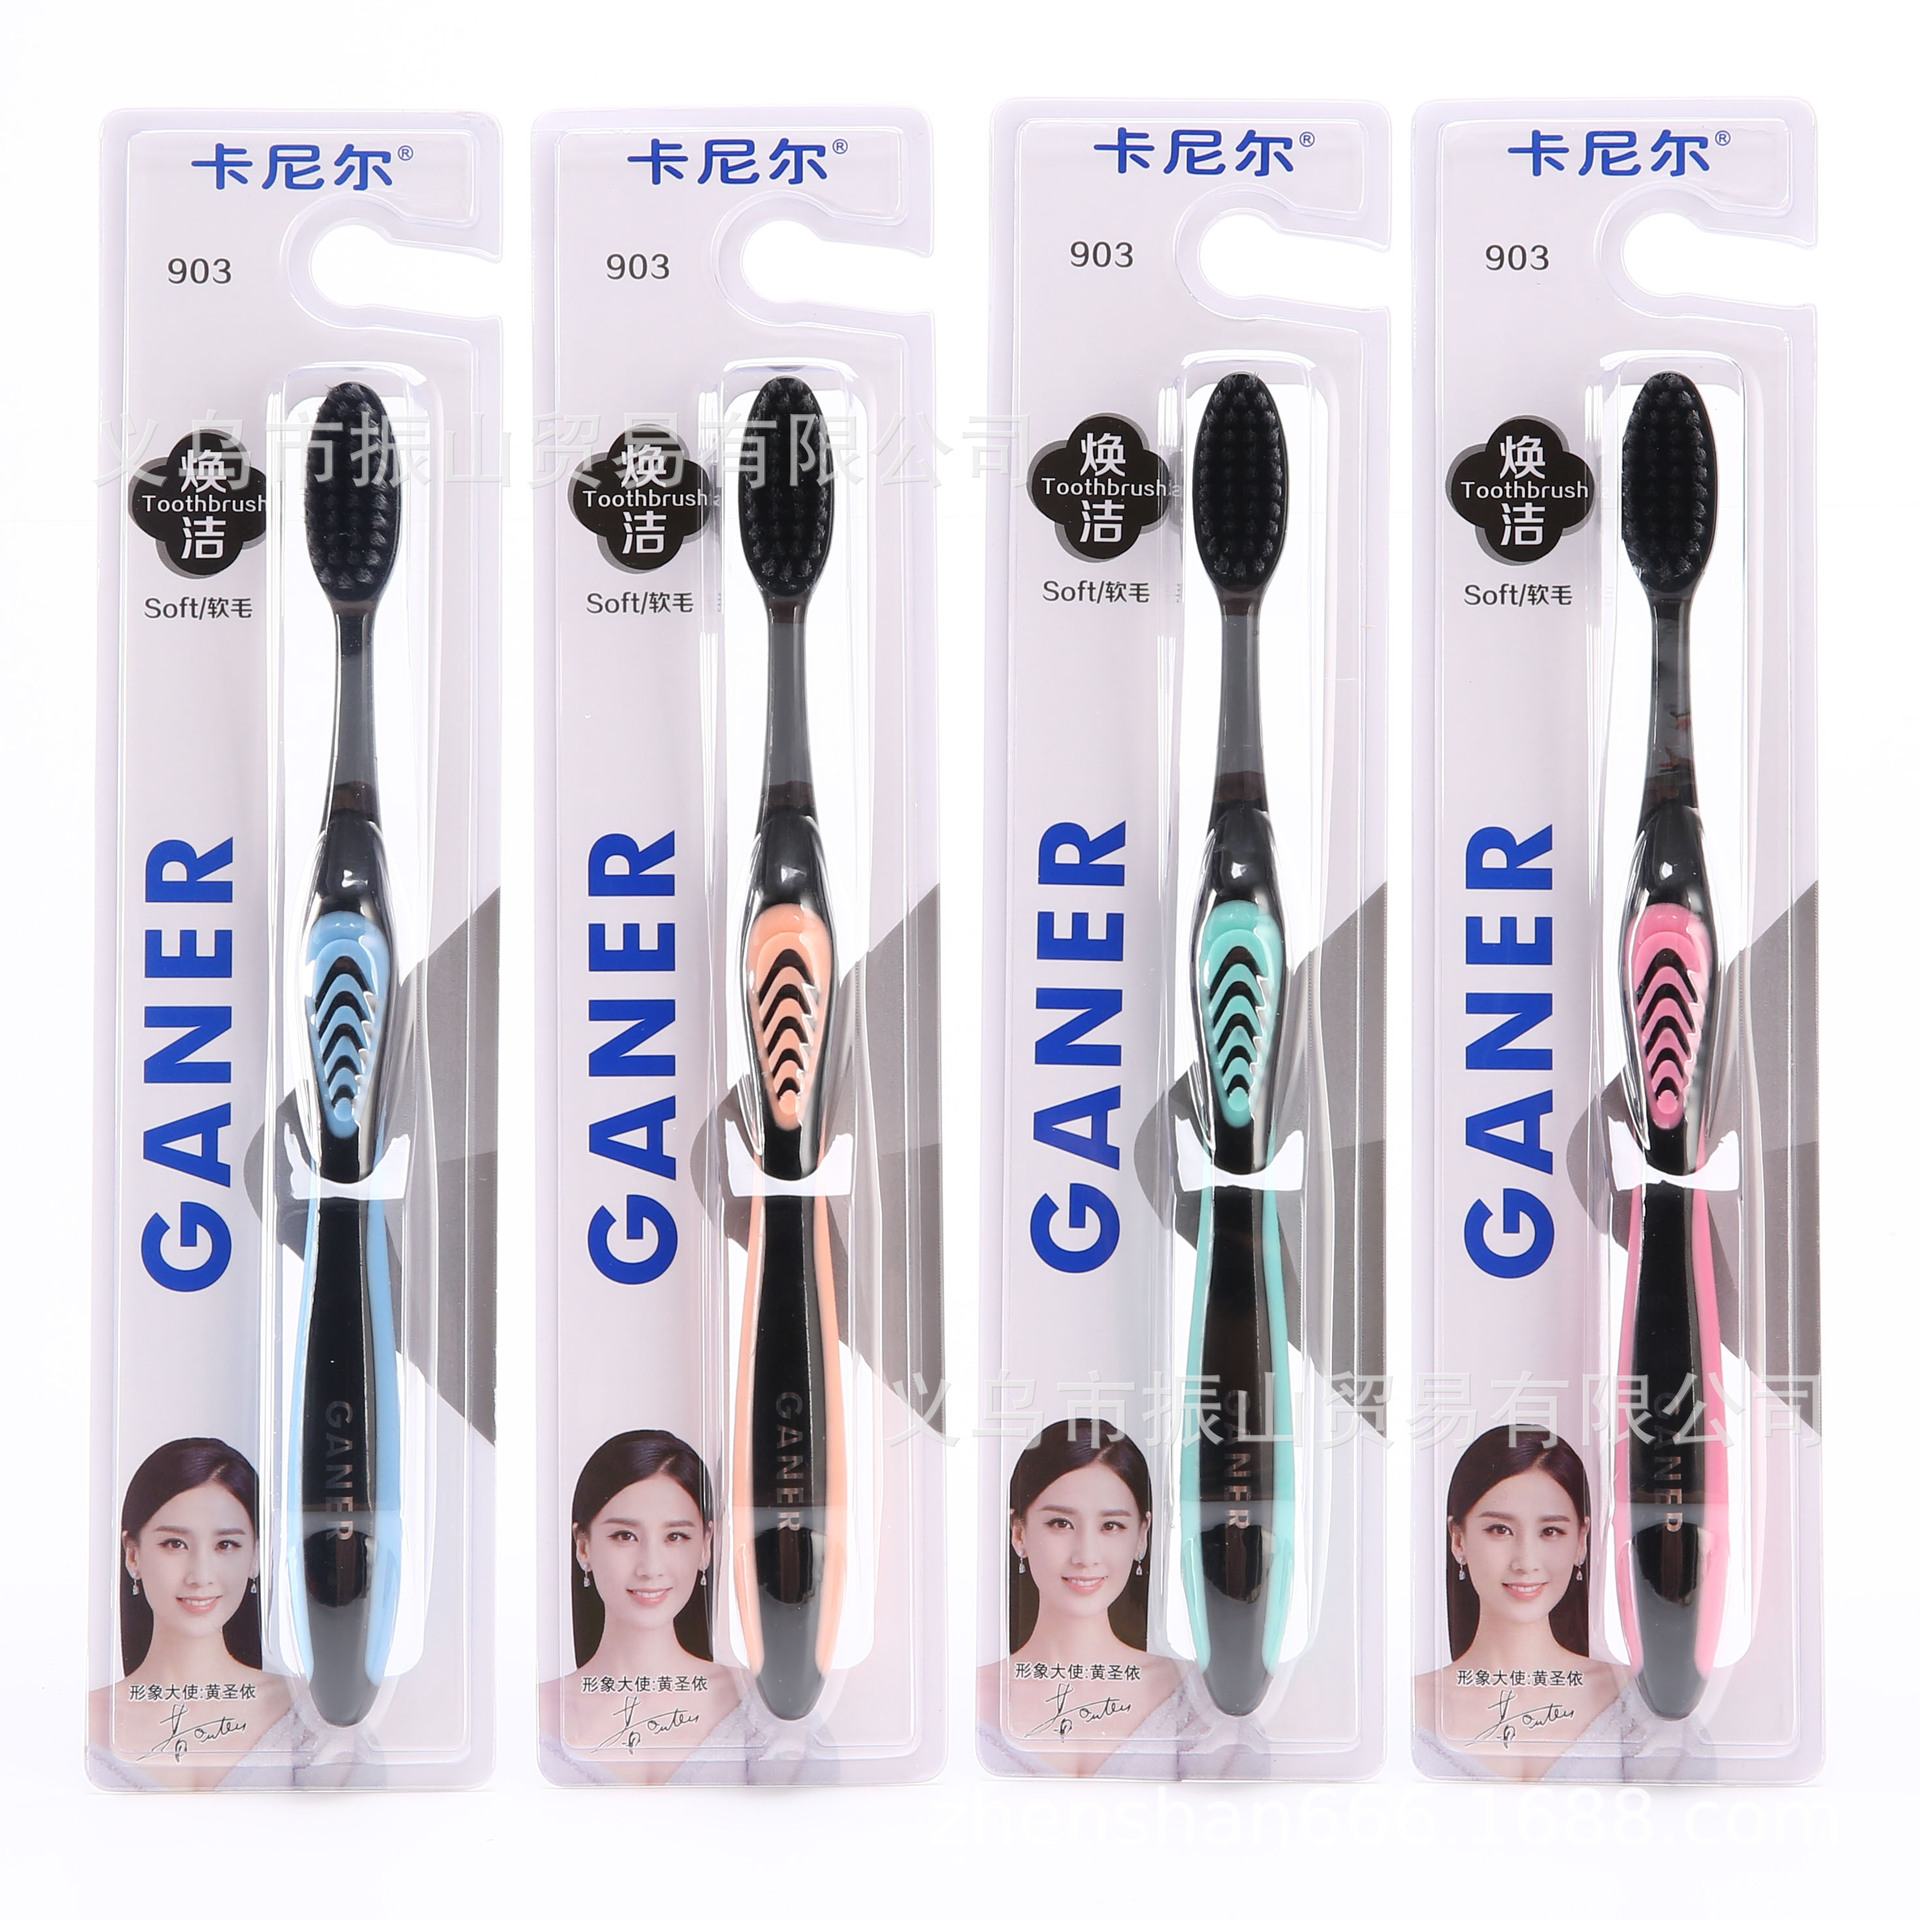 carnier 903 adult toothbrush wholesale new comfortable cleaning toothbrush unique bruch head